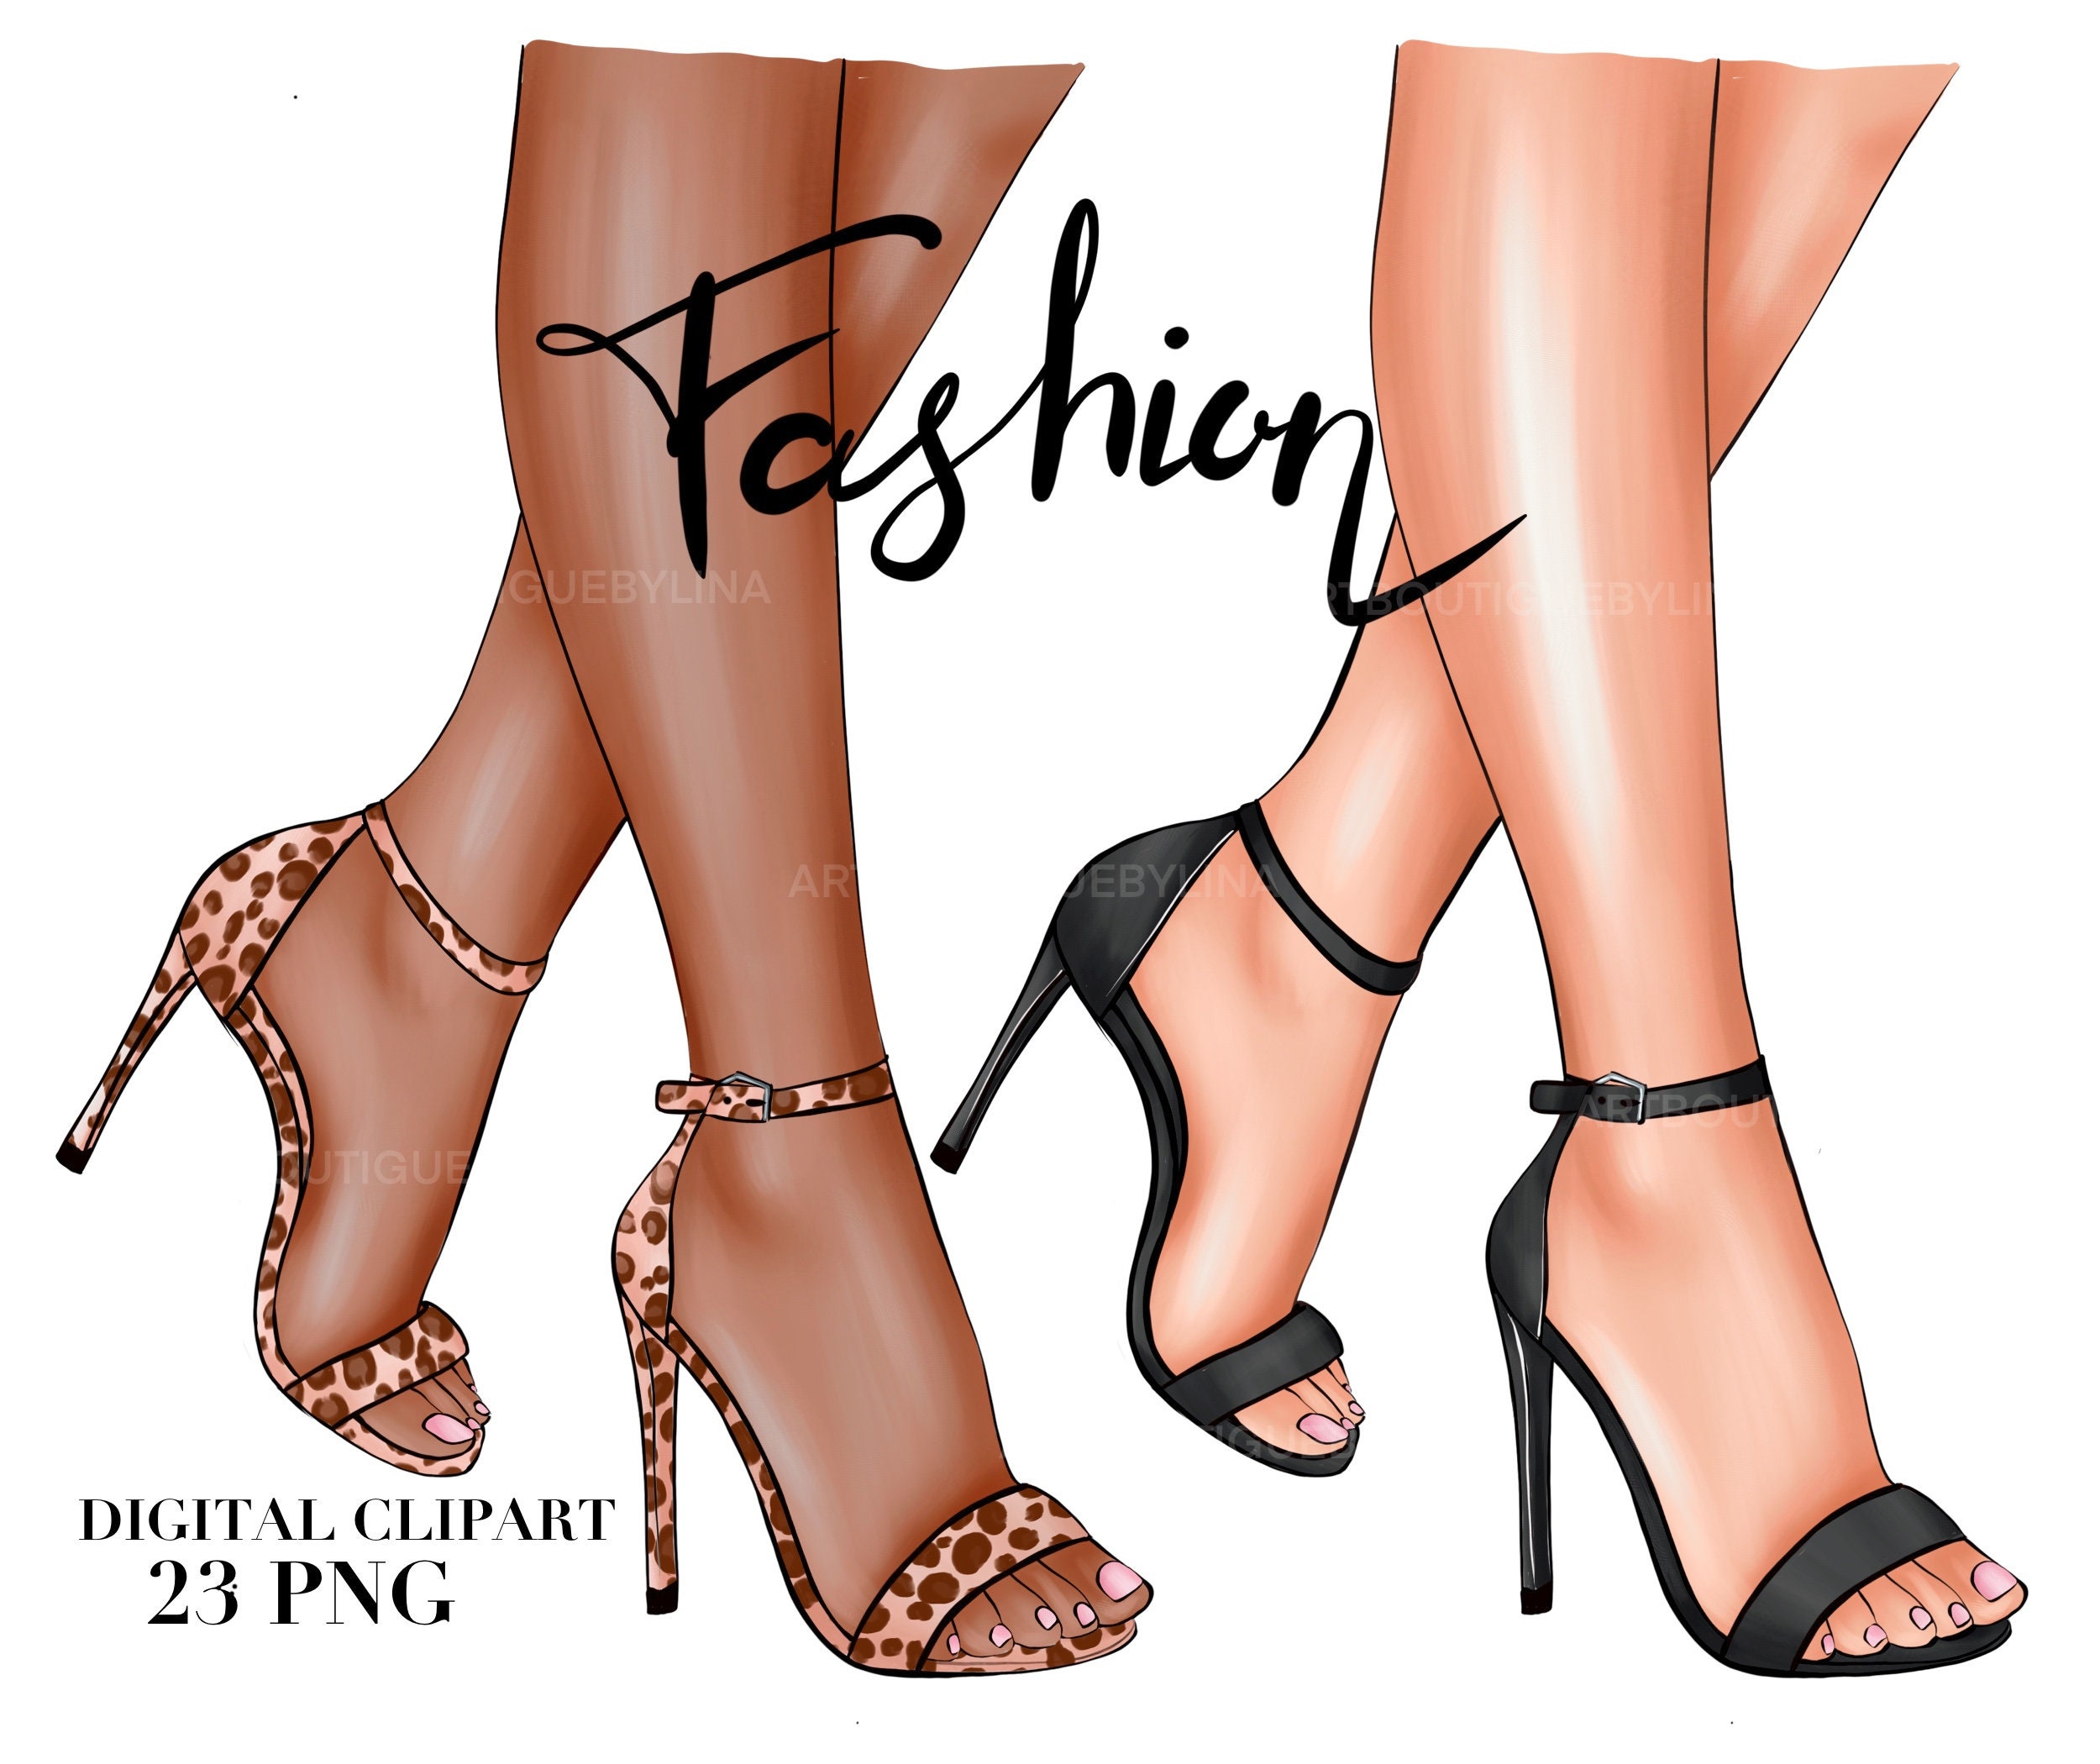 Clipart Fashionable Shoes Clipart on High Heels Beauty - Etsy